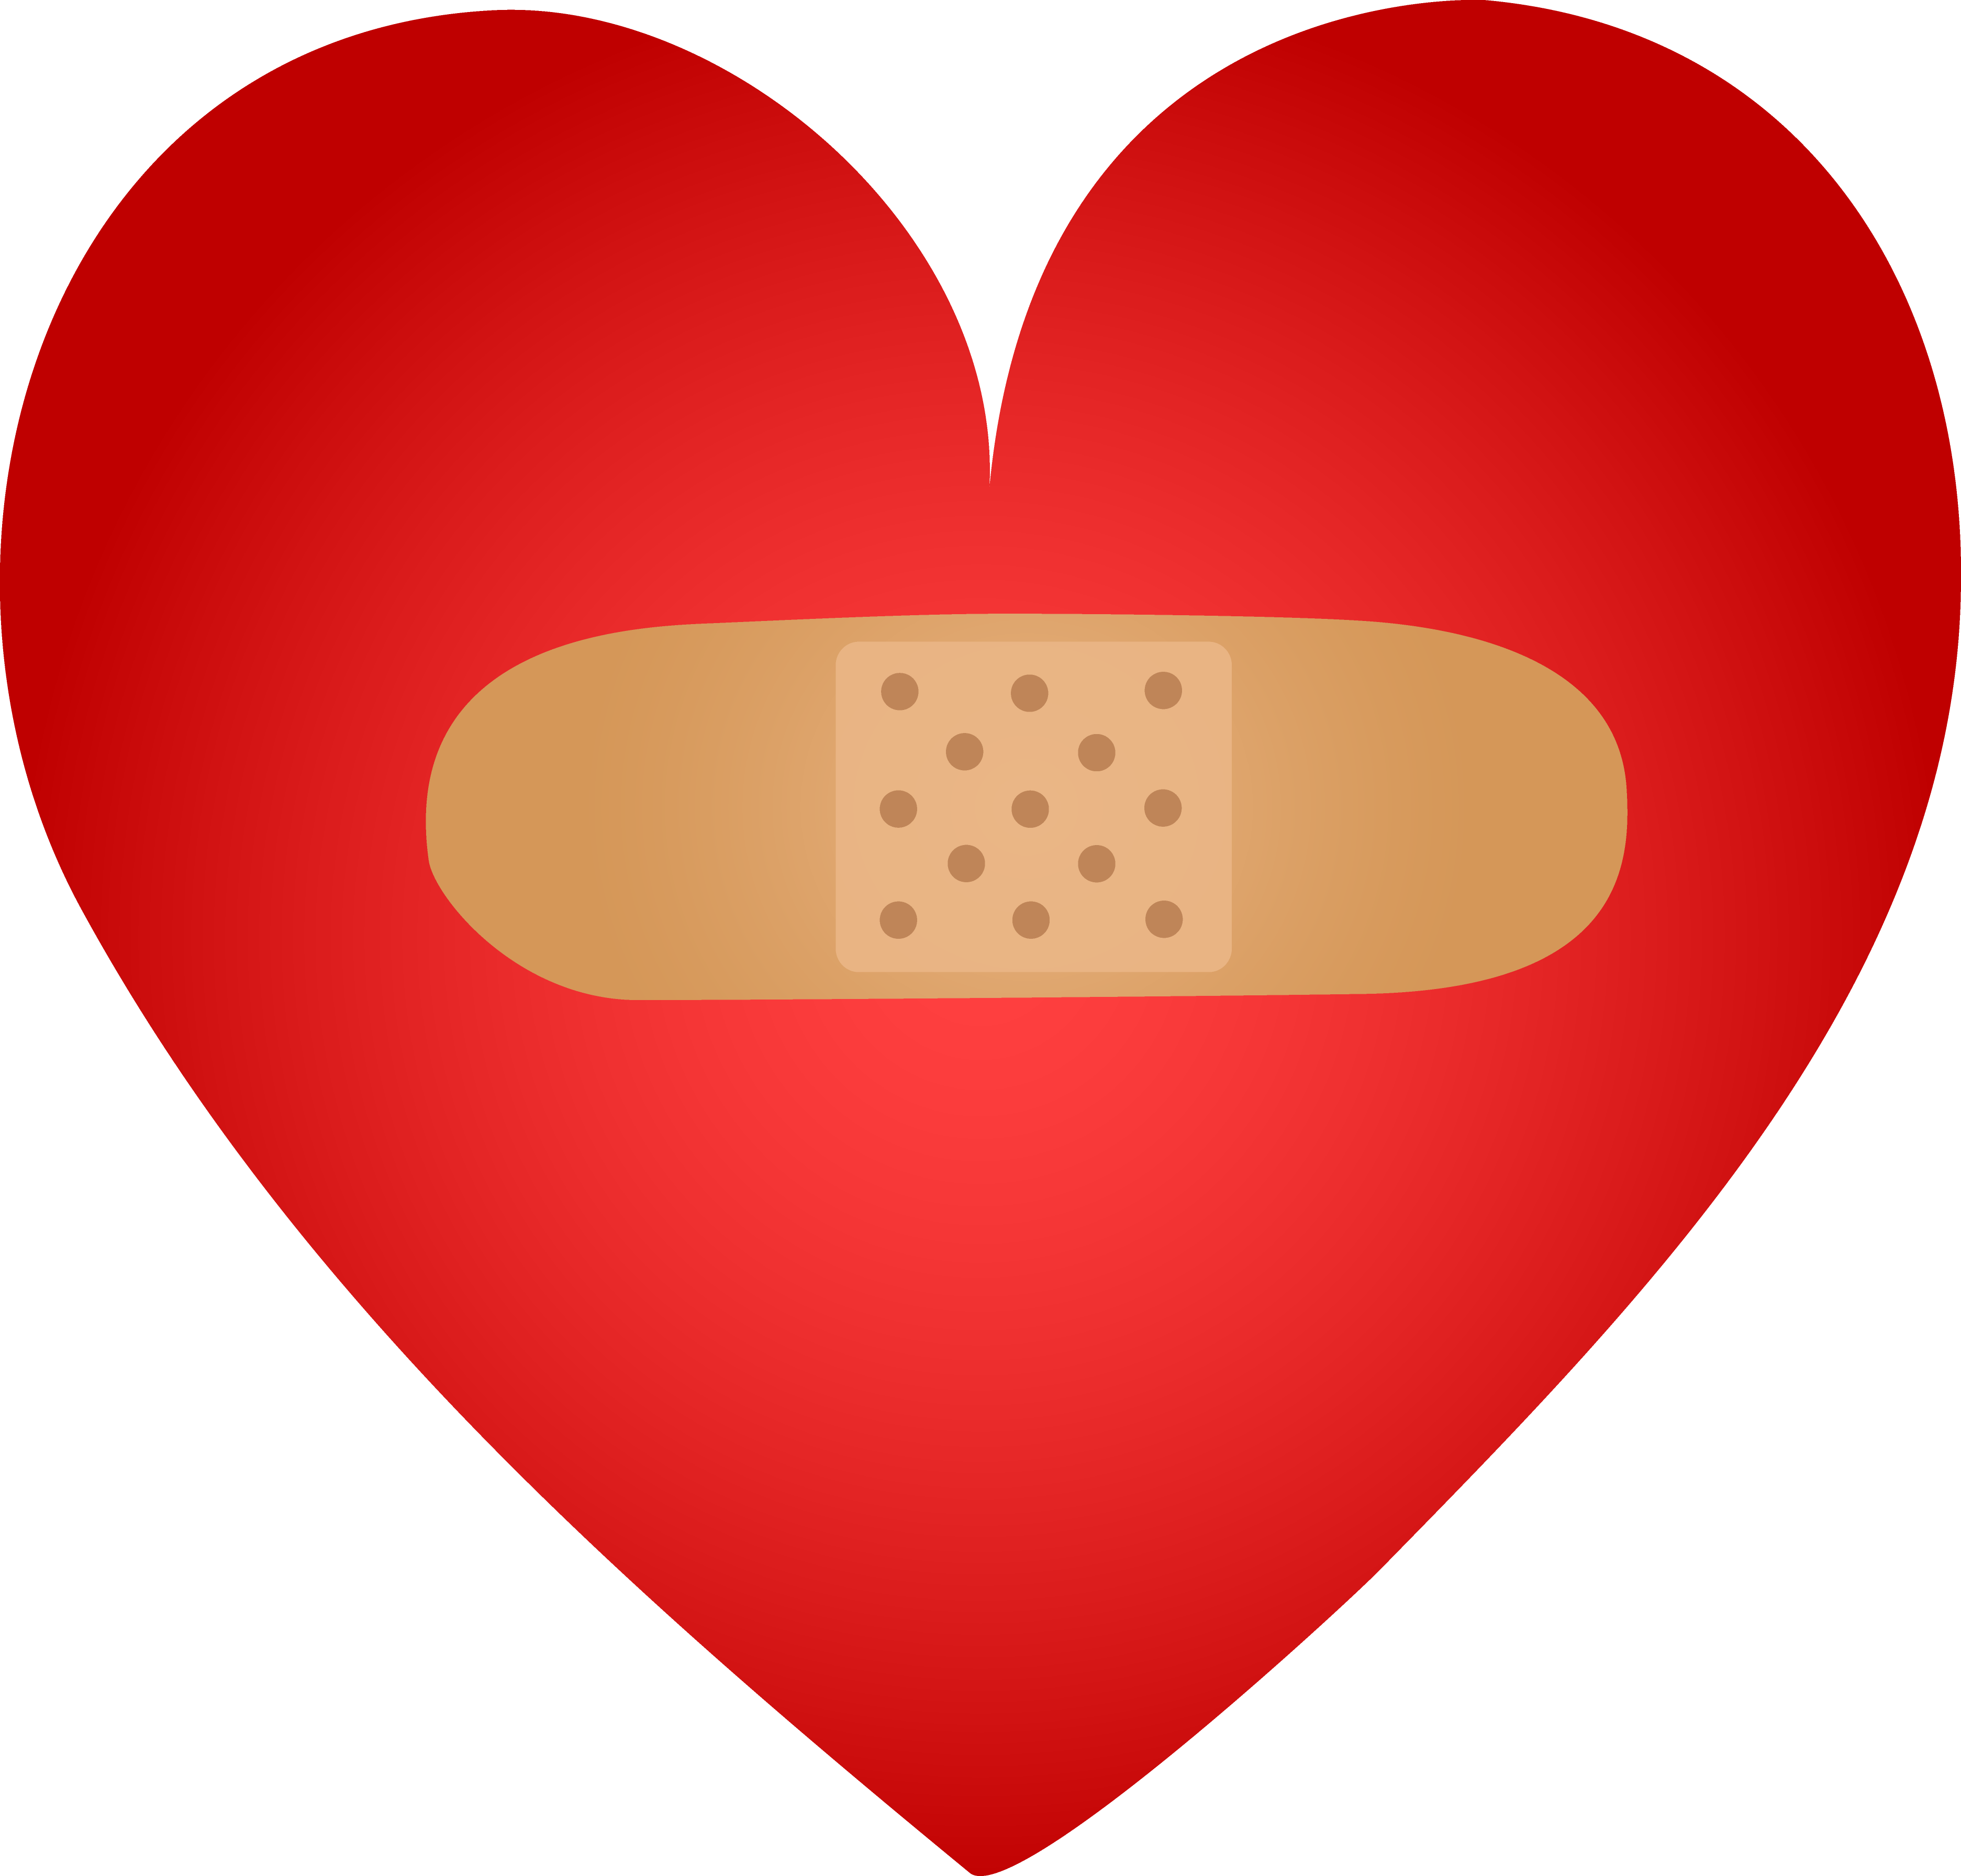 Healing Heart With Band Aid - Free Clip Art